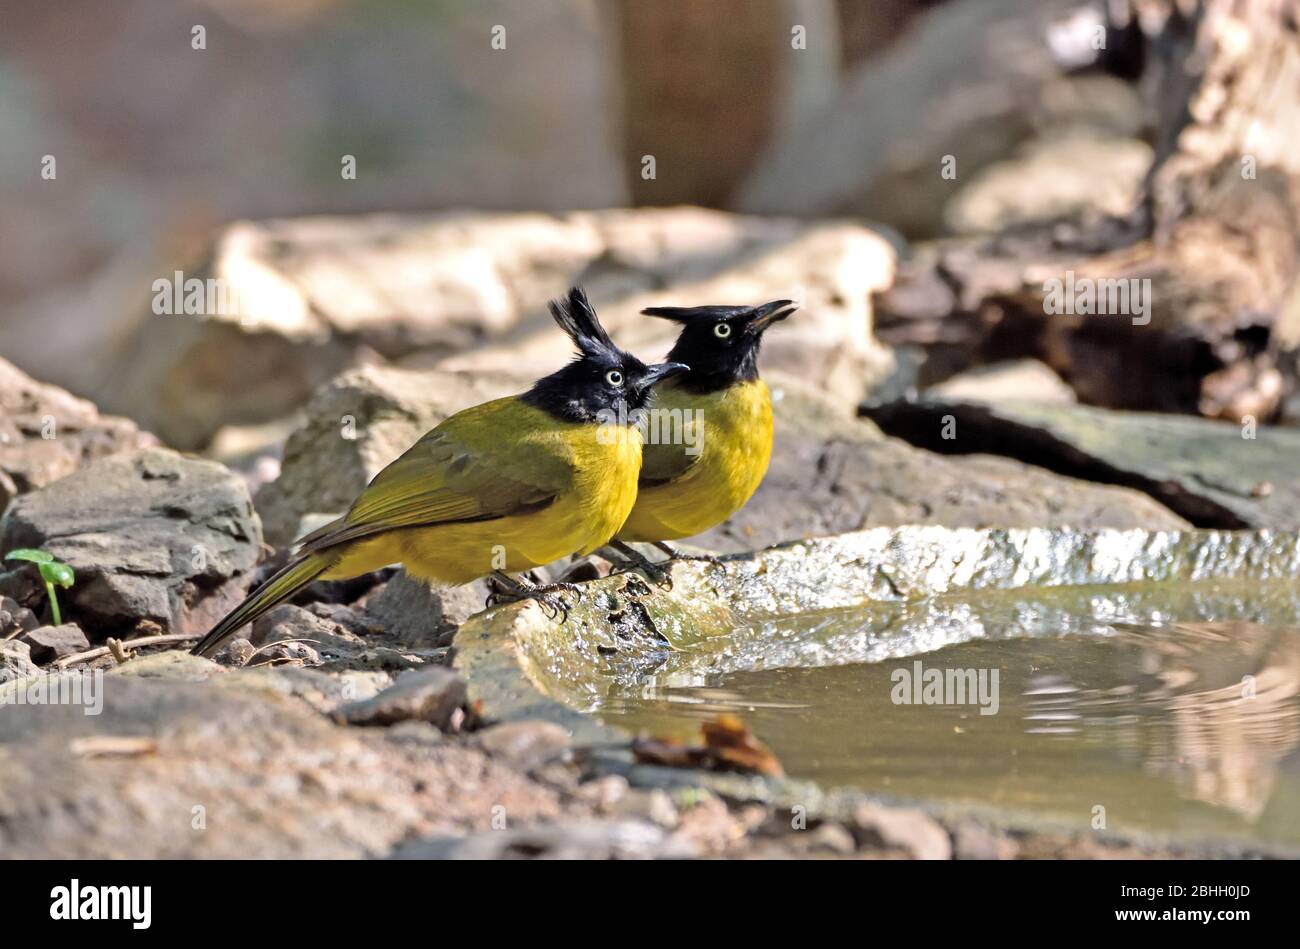 A pair of Black-crested Bulbuls (Pycnontus flaviventris) drinking from a small pool in the forest in Western Thailand Stock Photo